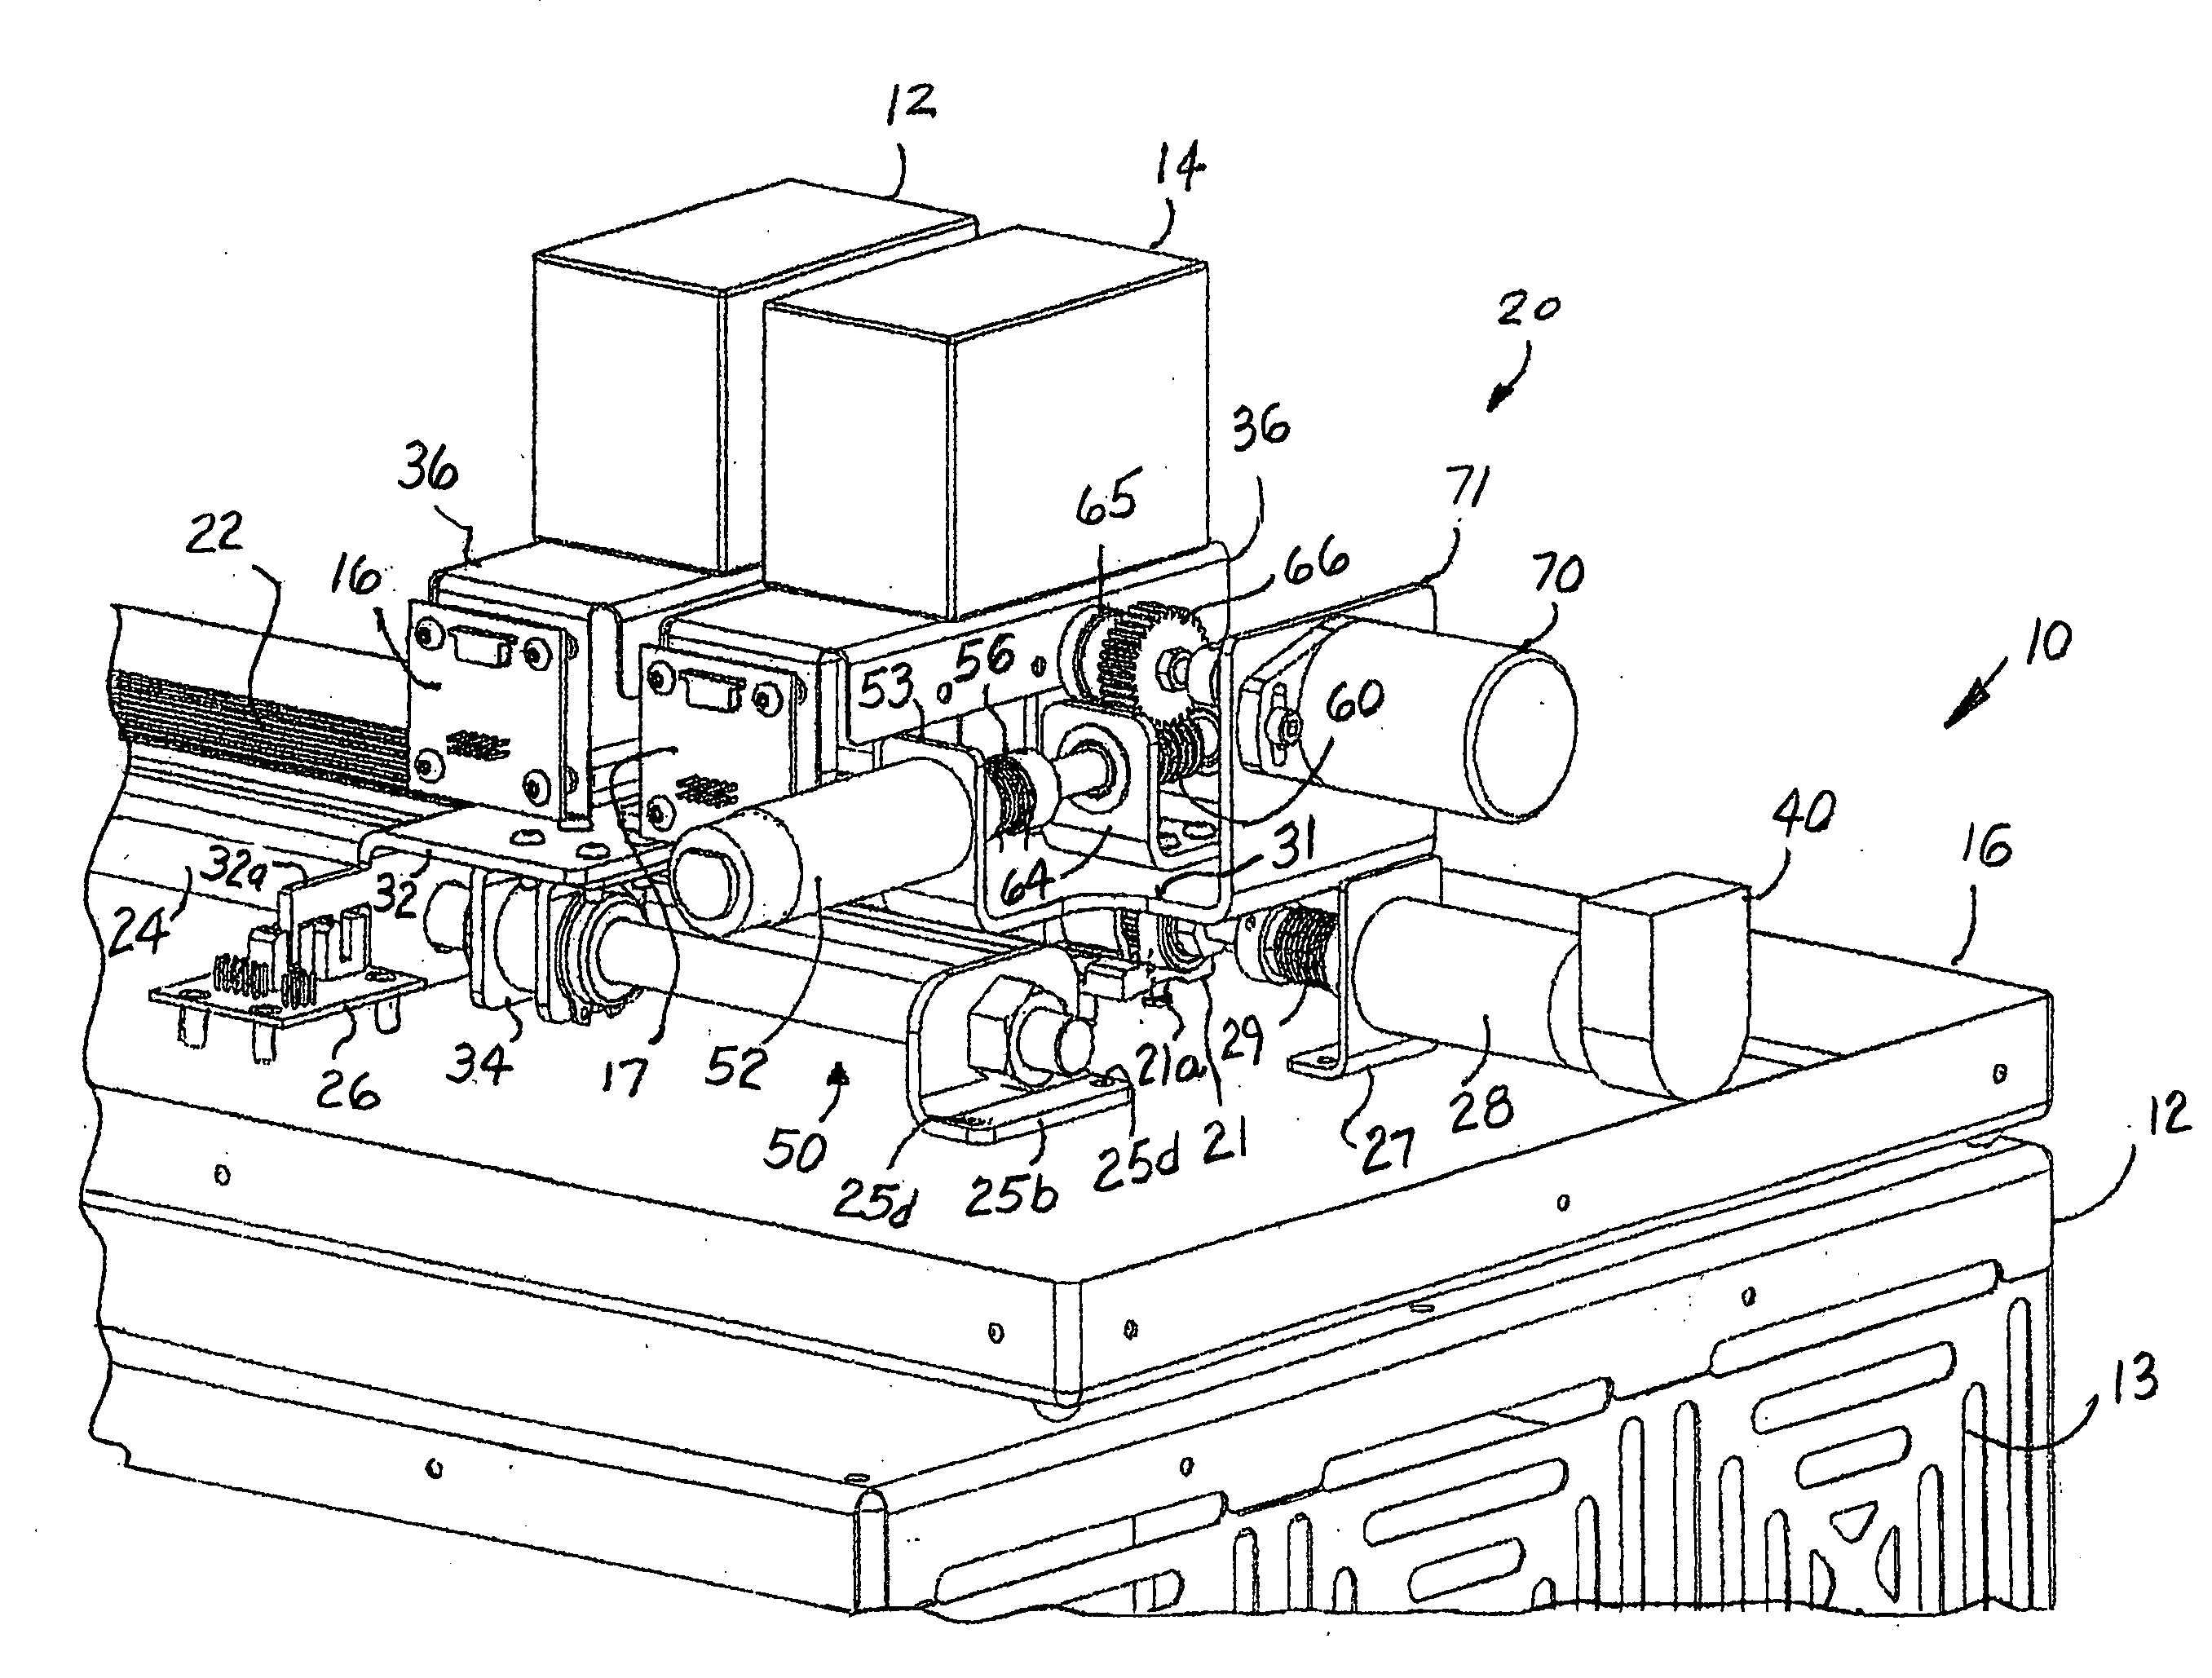 Apparatus, system and method for generating stereoscopic images and correcting for vertical parallax